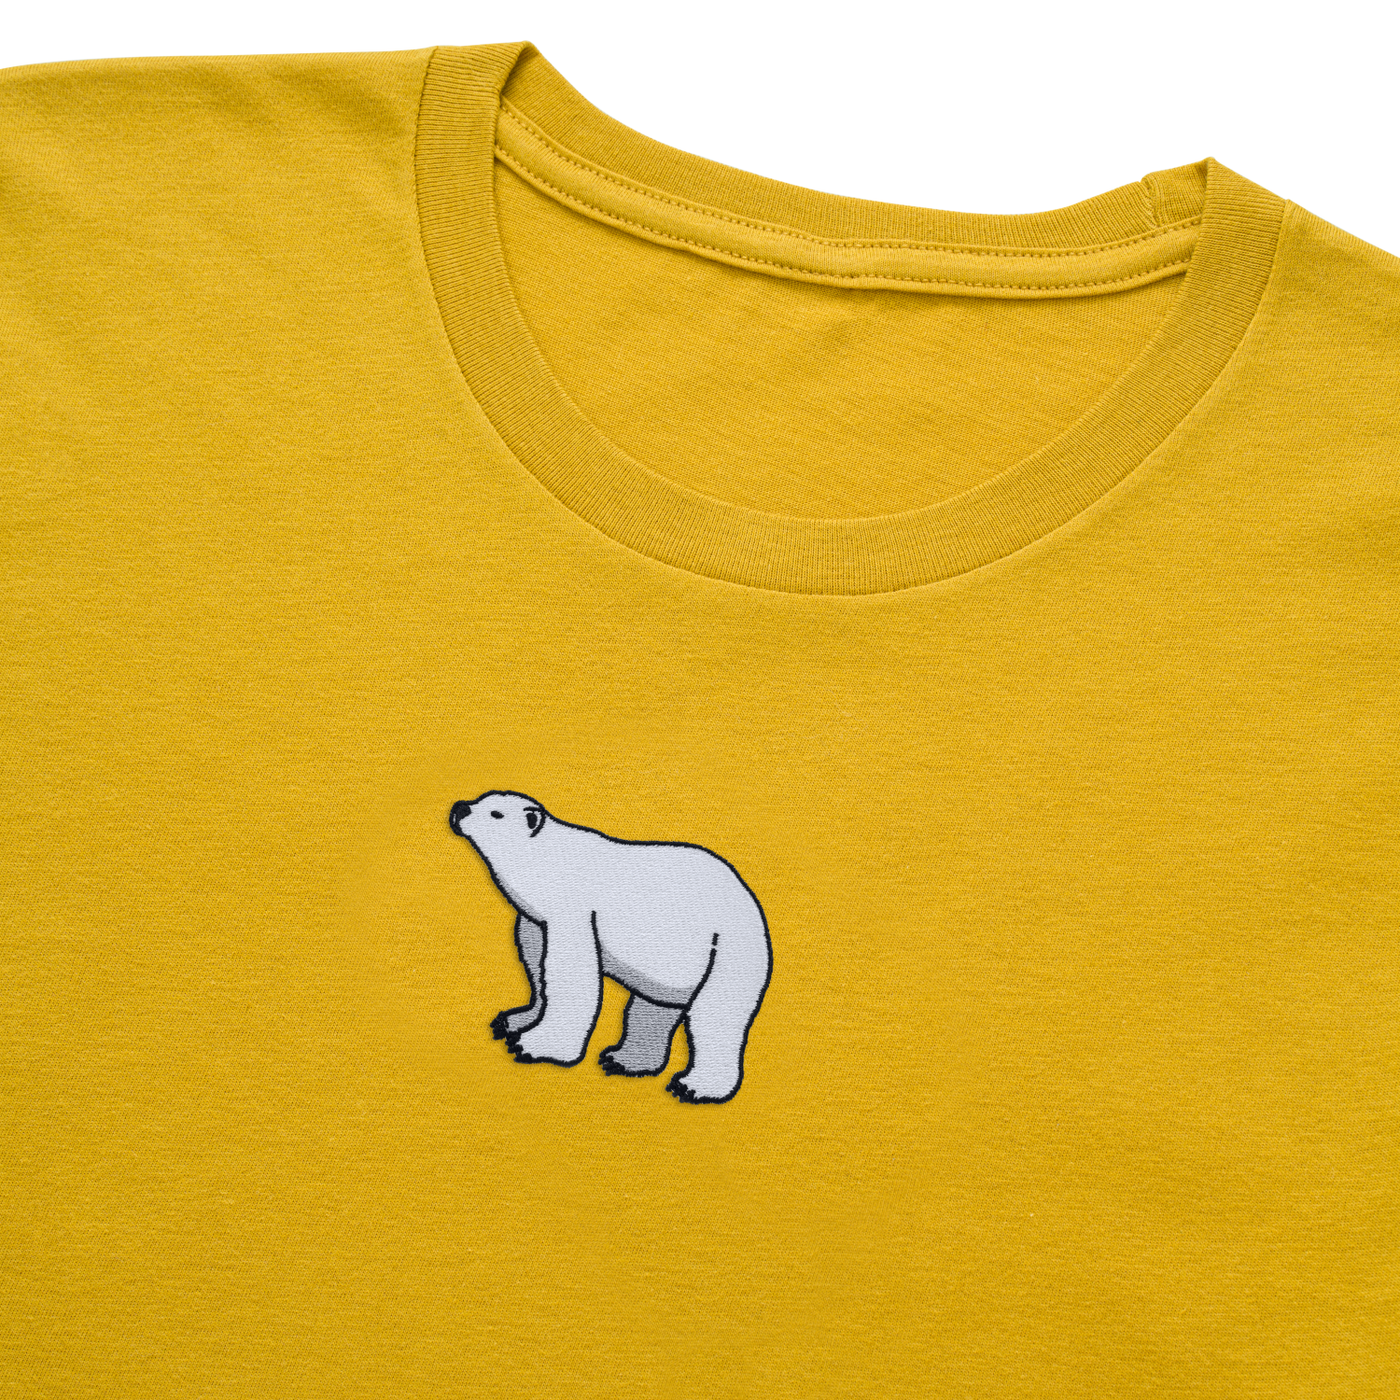 Bobby's Planet Women's Embroidered Polar Bear T-Shirt from Arctic Polar Animals Collection in Mustard Color#color_mustard